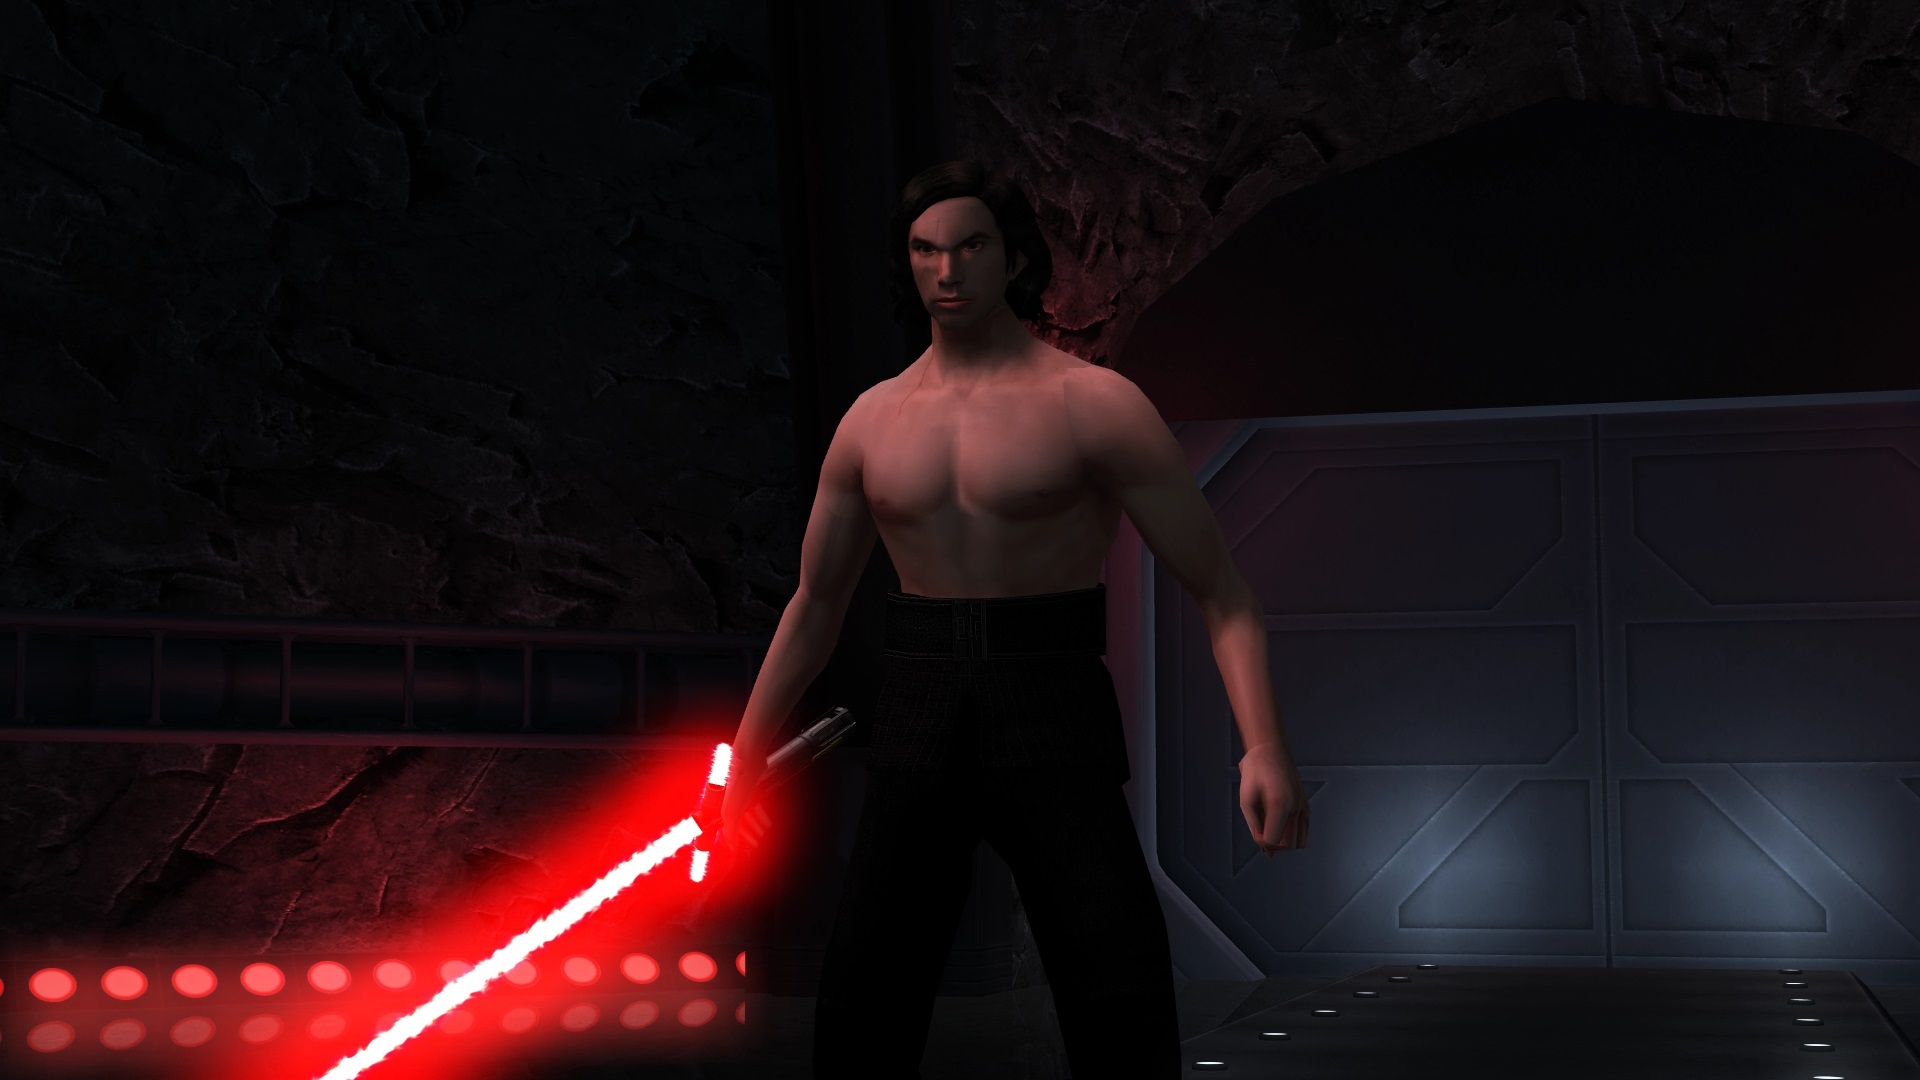 Shirtless Kylo Ren with crossguard lightsaber rendered in Jedi Academy